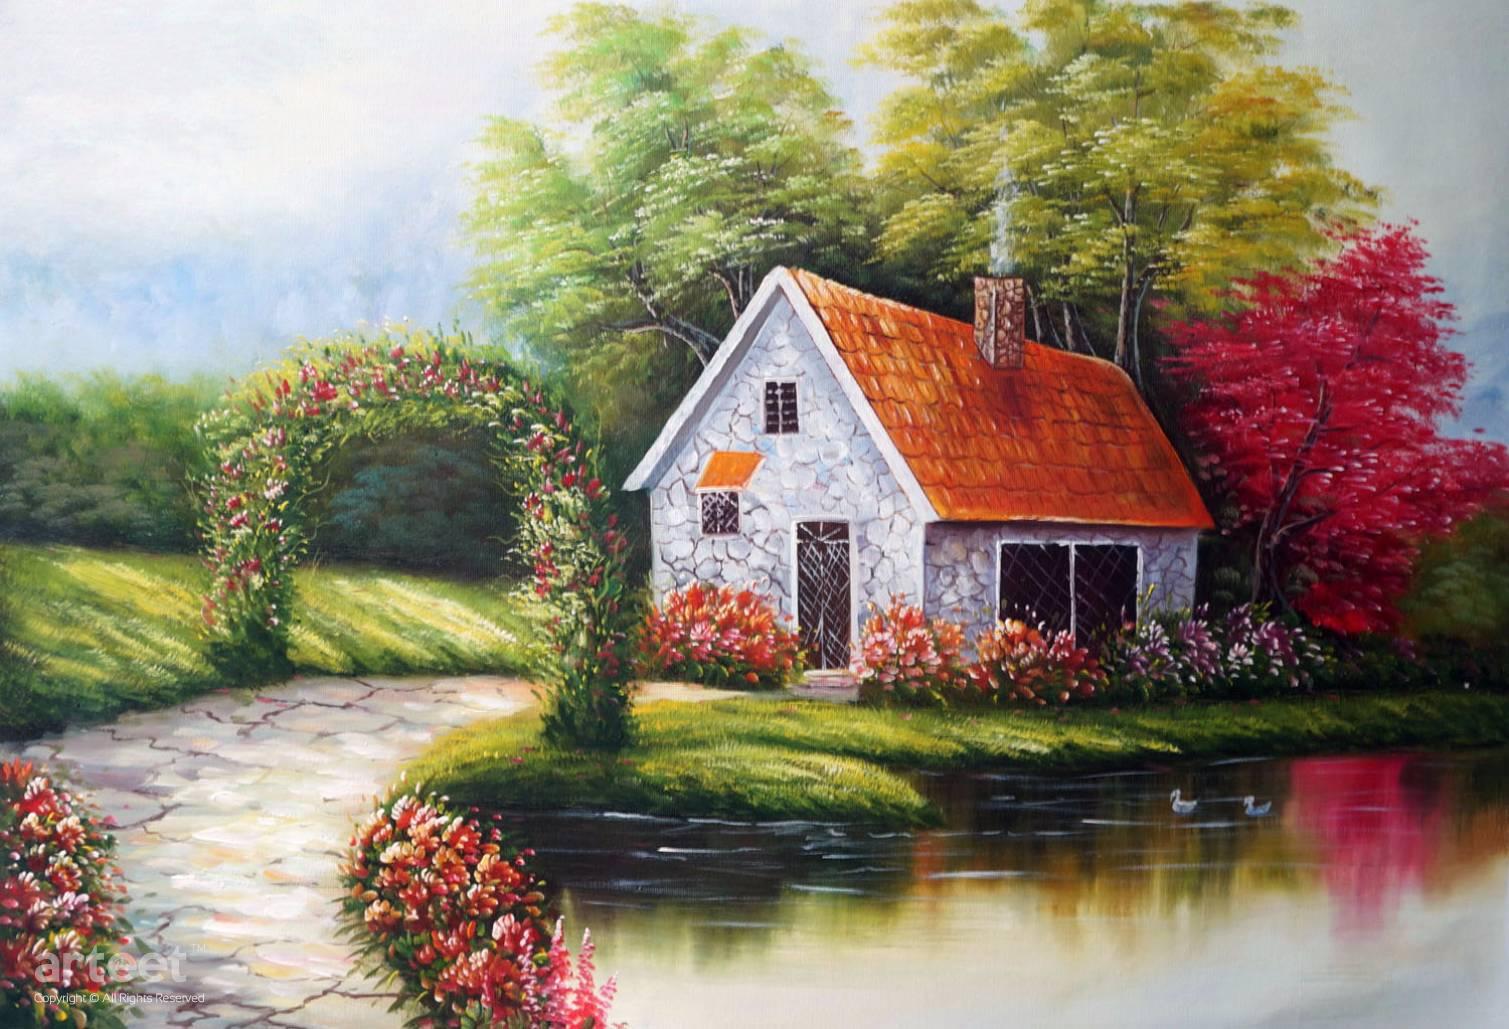  Home Sweet Home Art Paintings For Sale Online Gallery